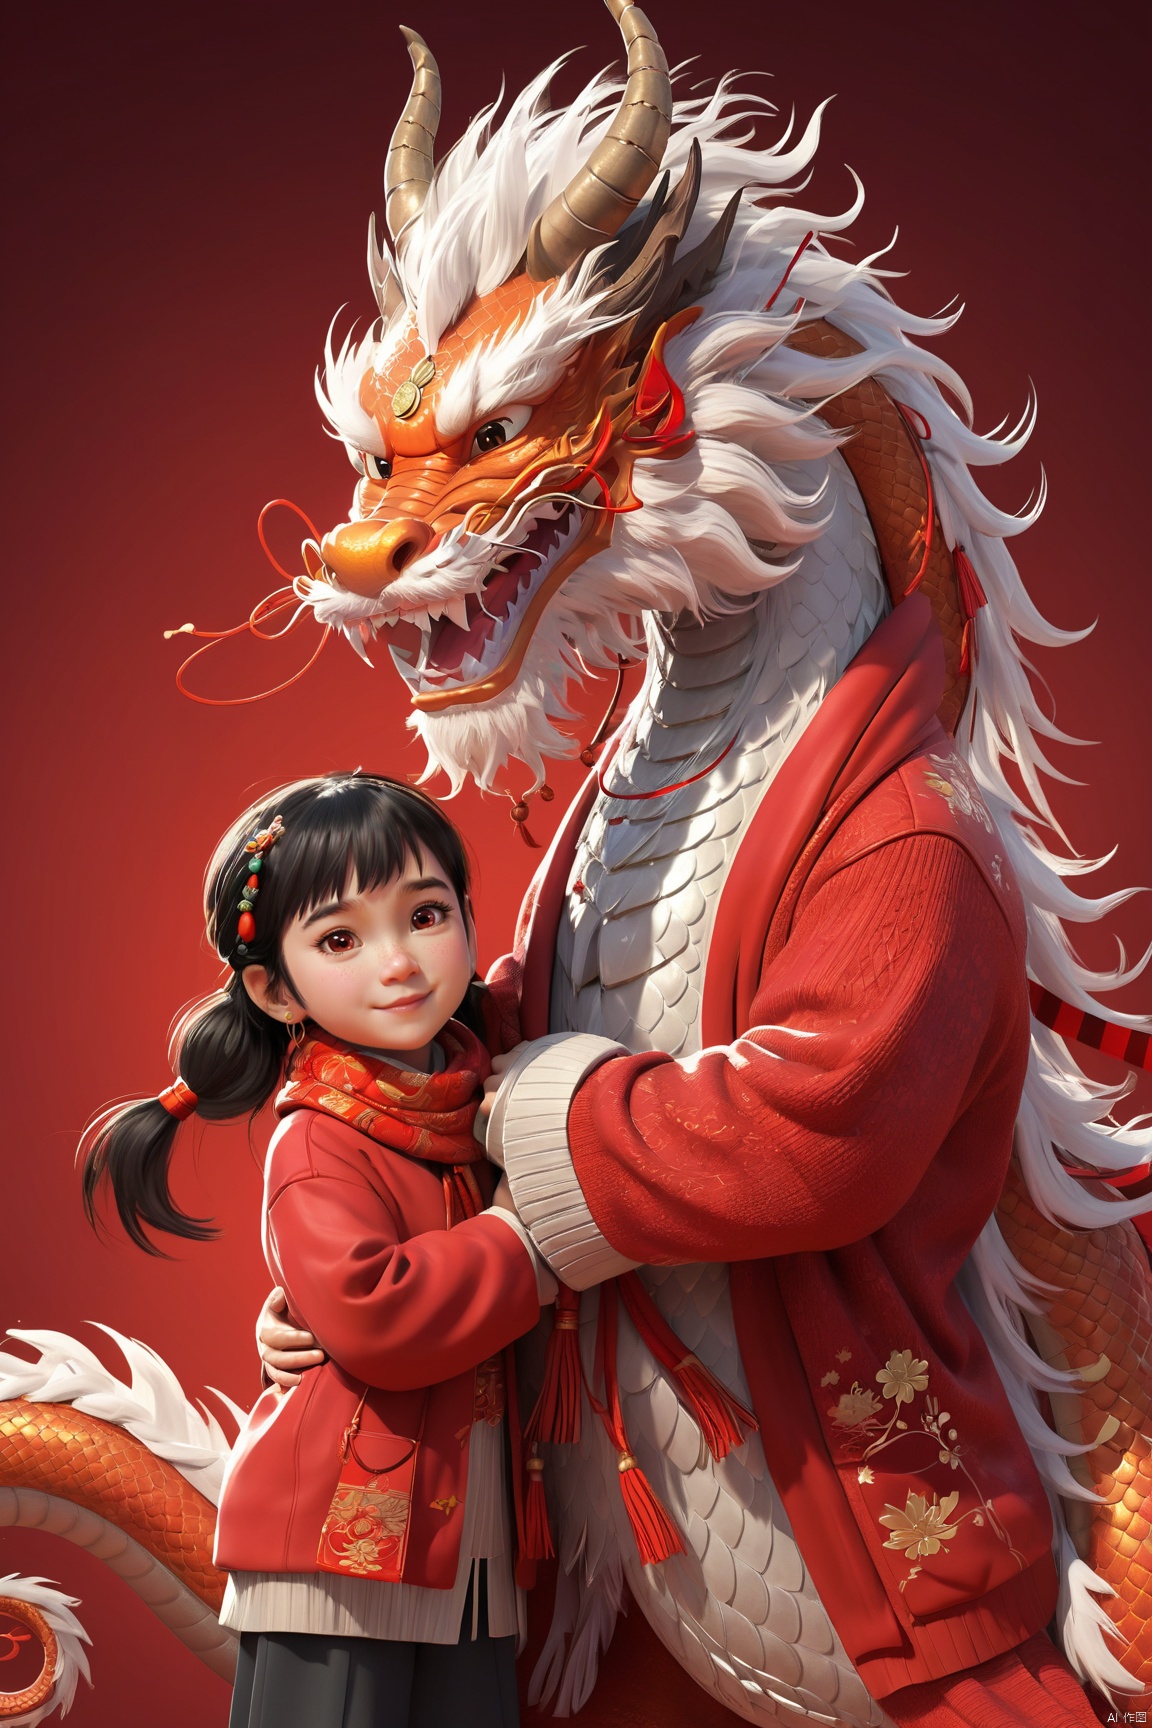  A cute and humanized red Chinese dragon and a Chinese little girl, in Pixar style, both wearing human red sweaters and tying a red woolen scarf around their necks, performing the same congratulatory gesture. The red background is very festive, with Chinese elements, welcoming the new year. 32k

